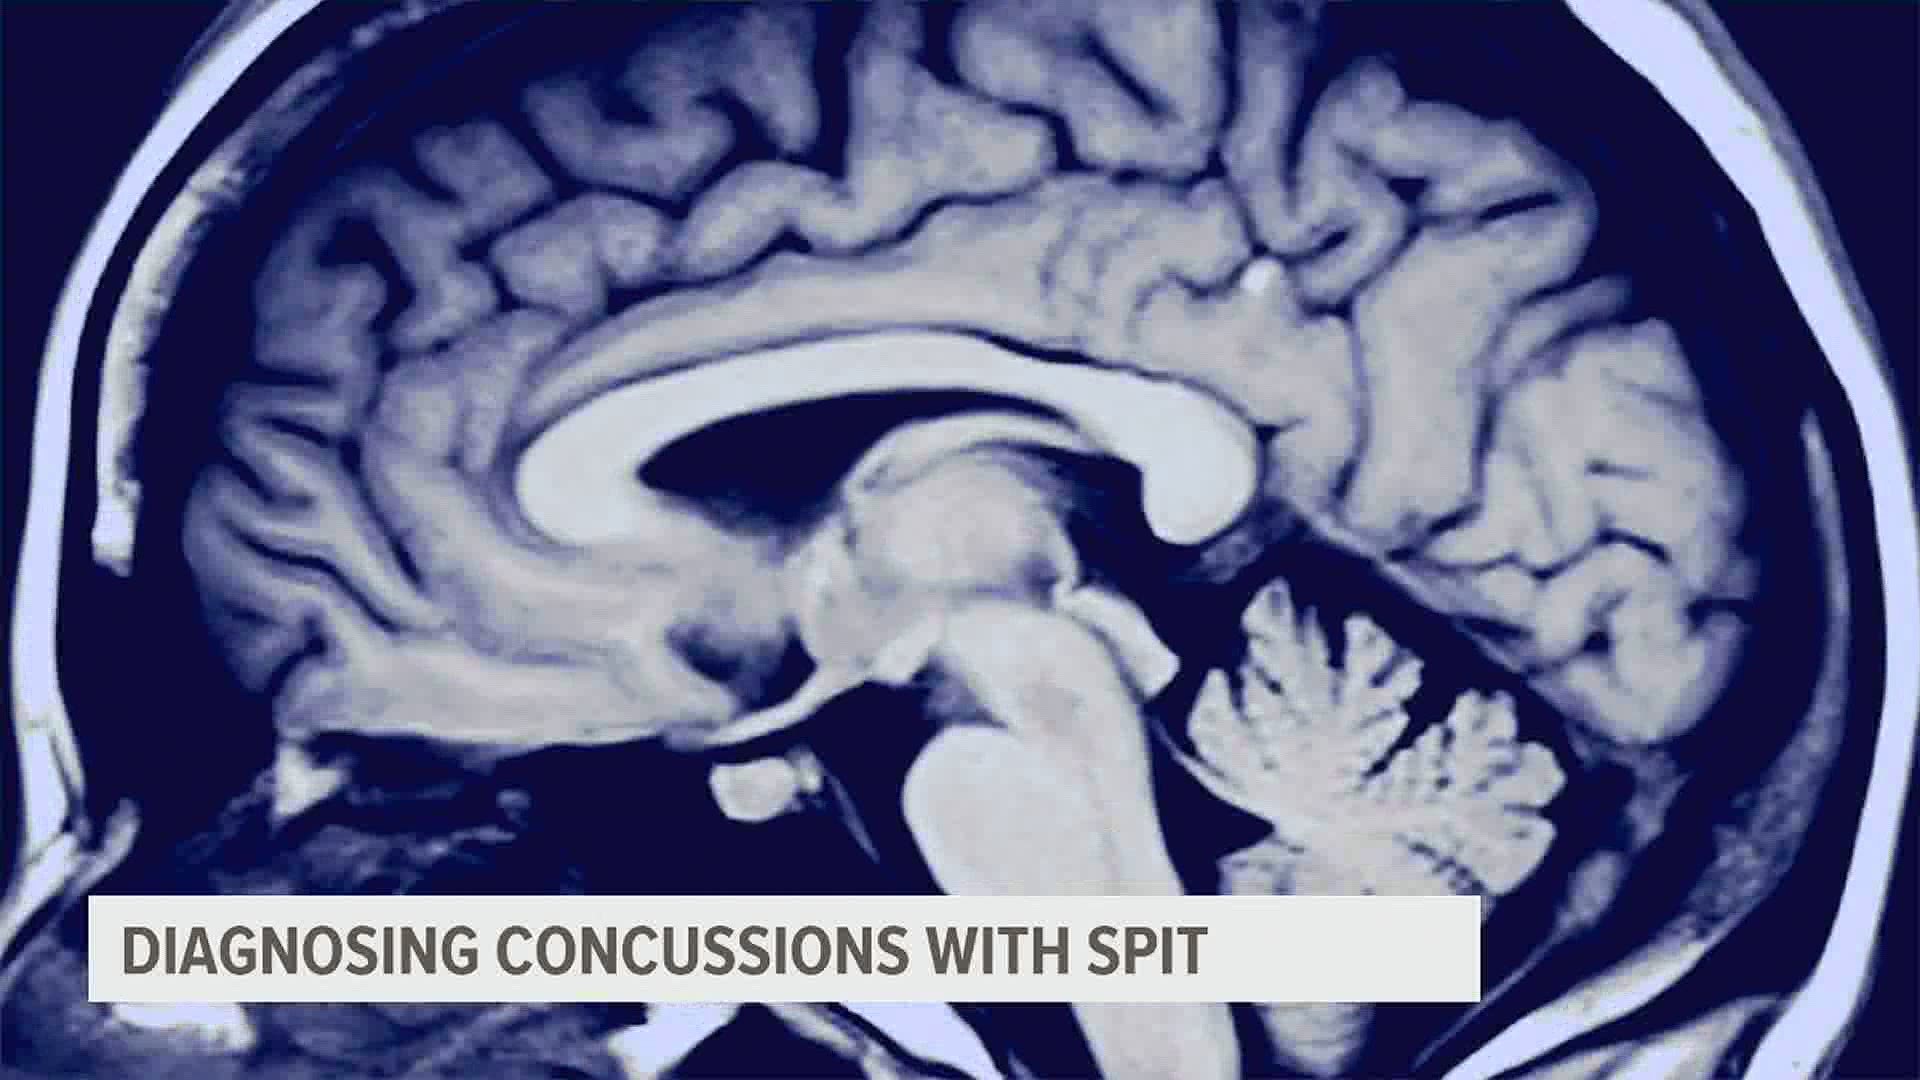 Penn State researchers said a spit test may be able to diagnose a concussion and predict how long symptoms will last.